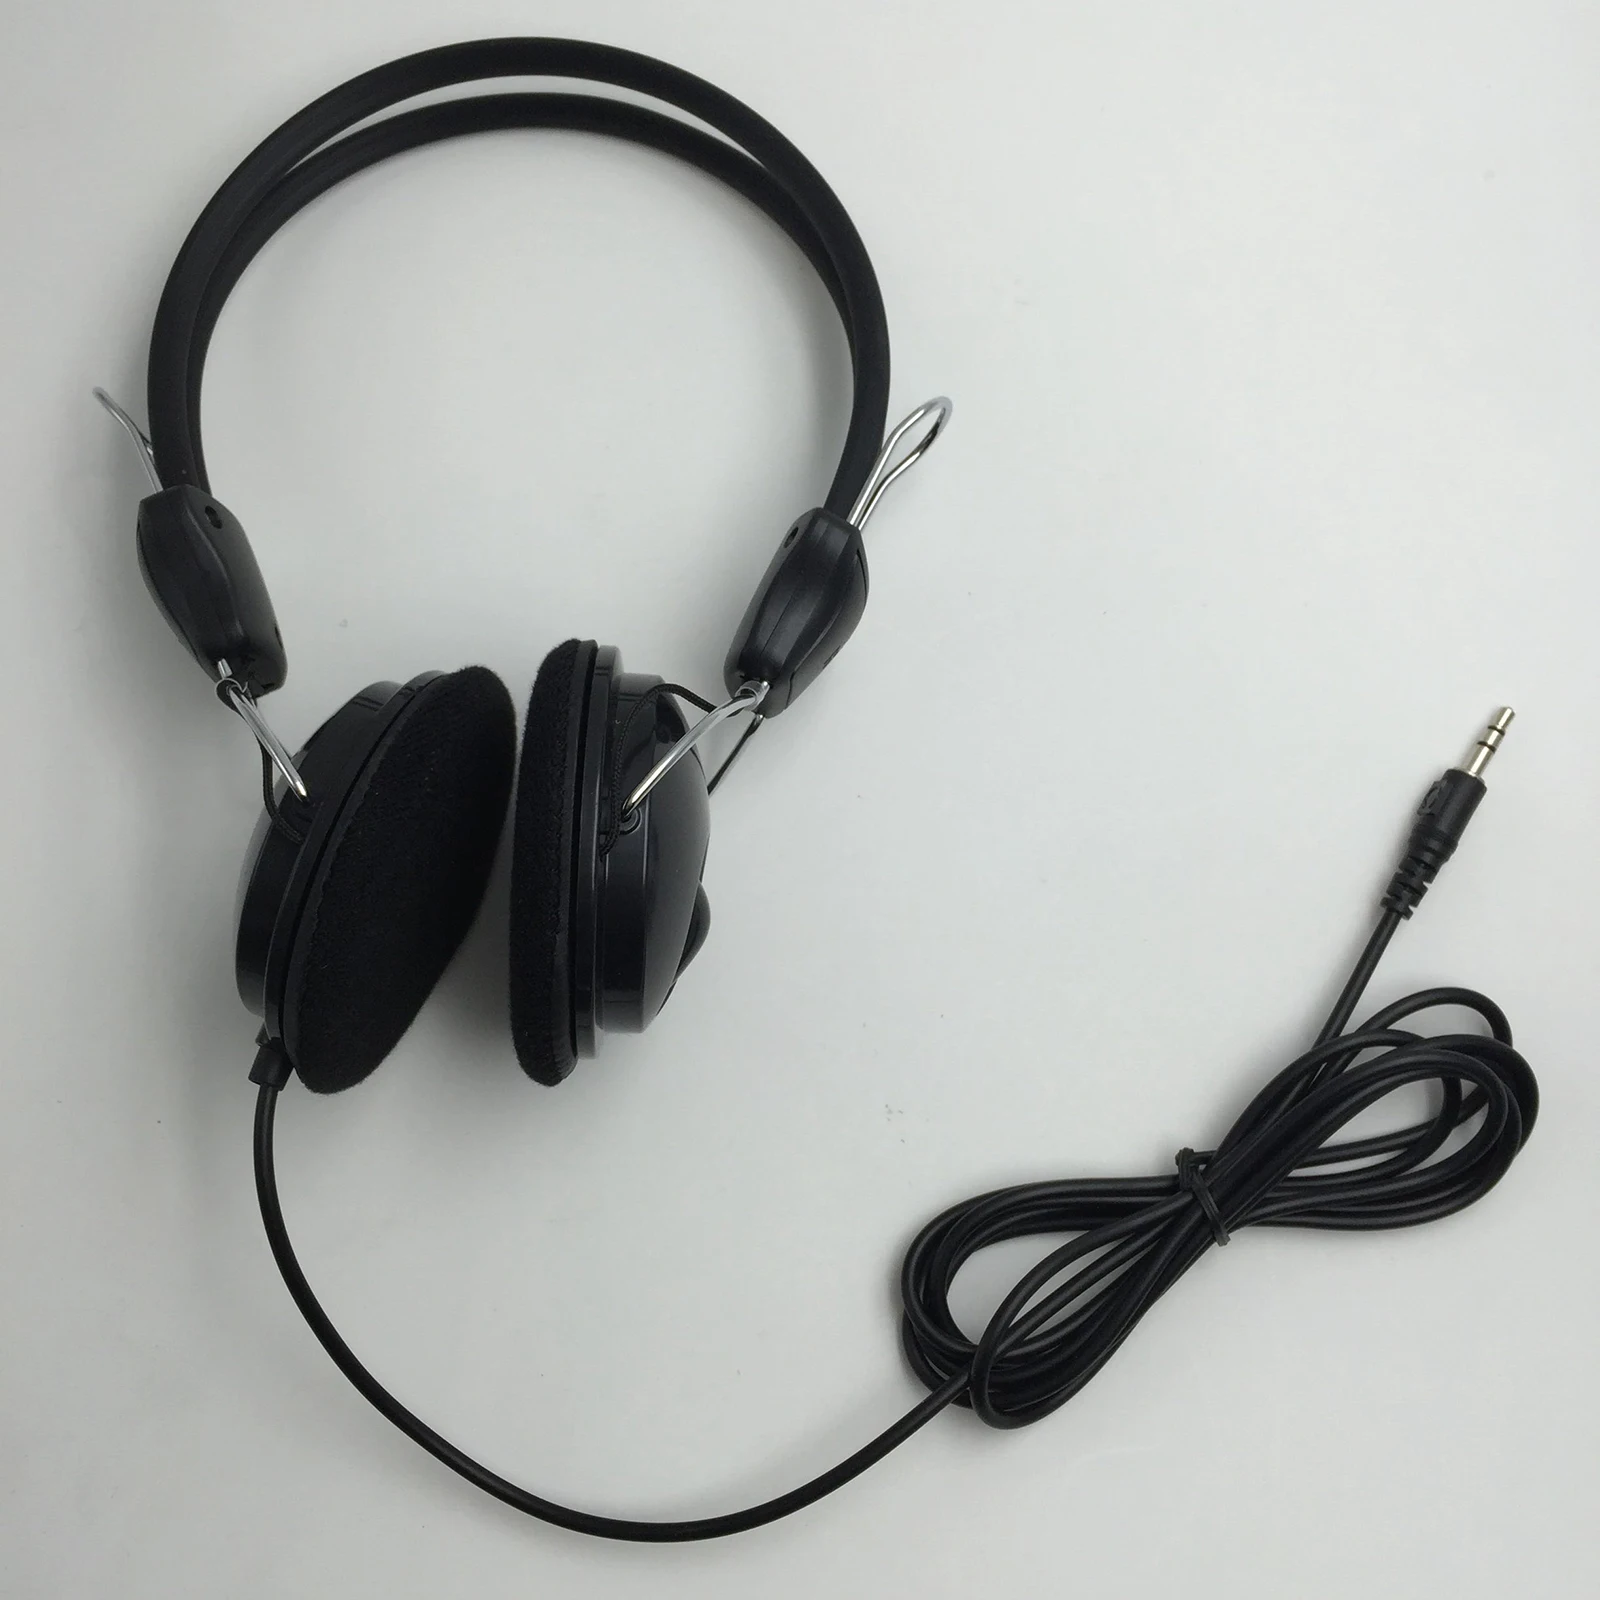 Black Headphones w/ Wire & Ear Cushion, for Metal Detectors Use, Portable and Lightweight